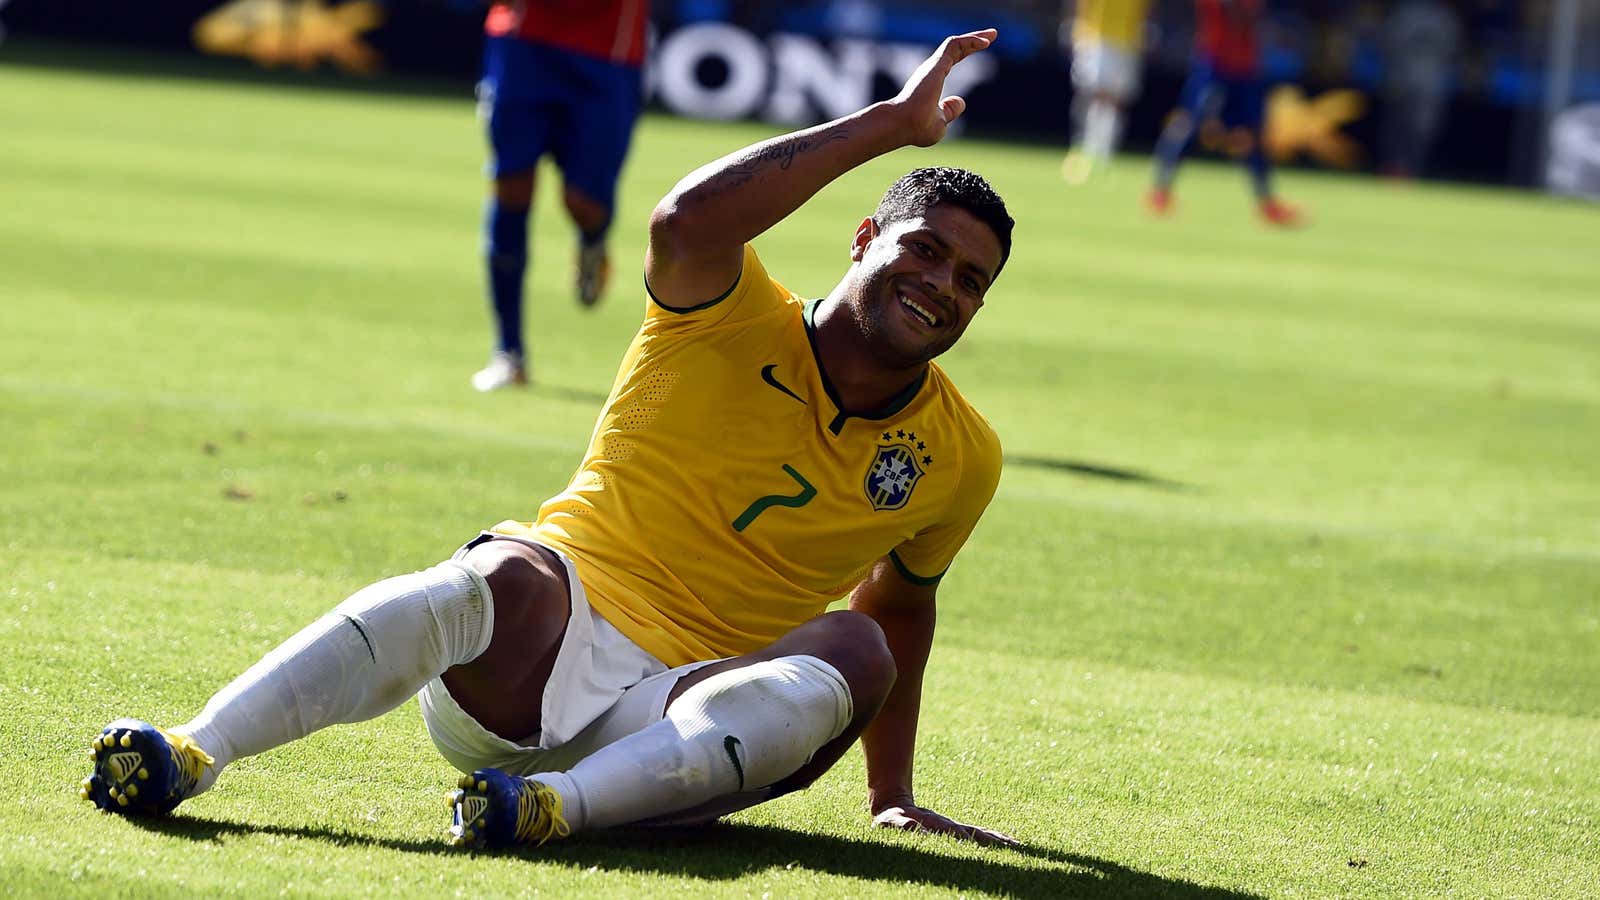 Brazil’s Hulk could be down and out of Champion’s League thanks to Putin’s power plays.